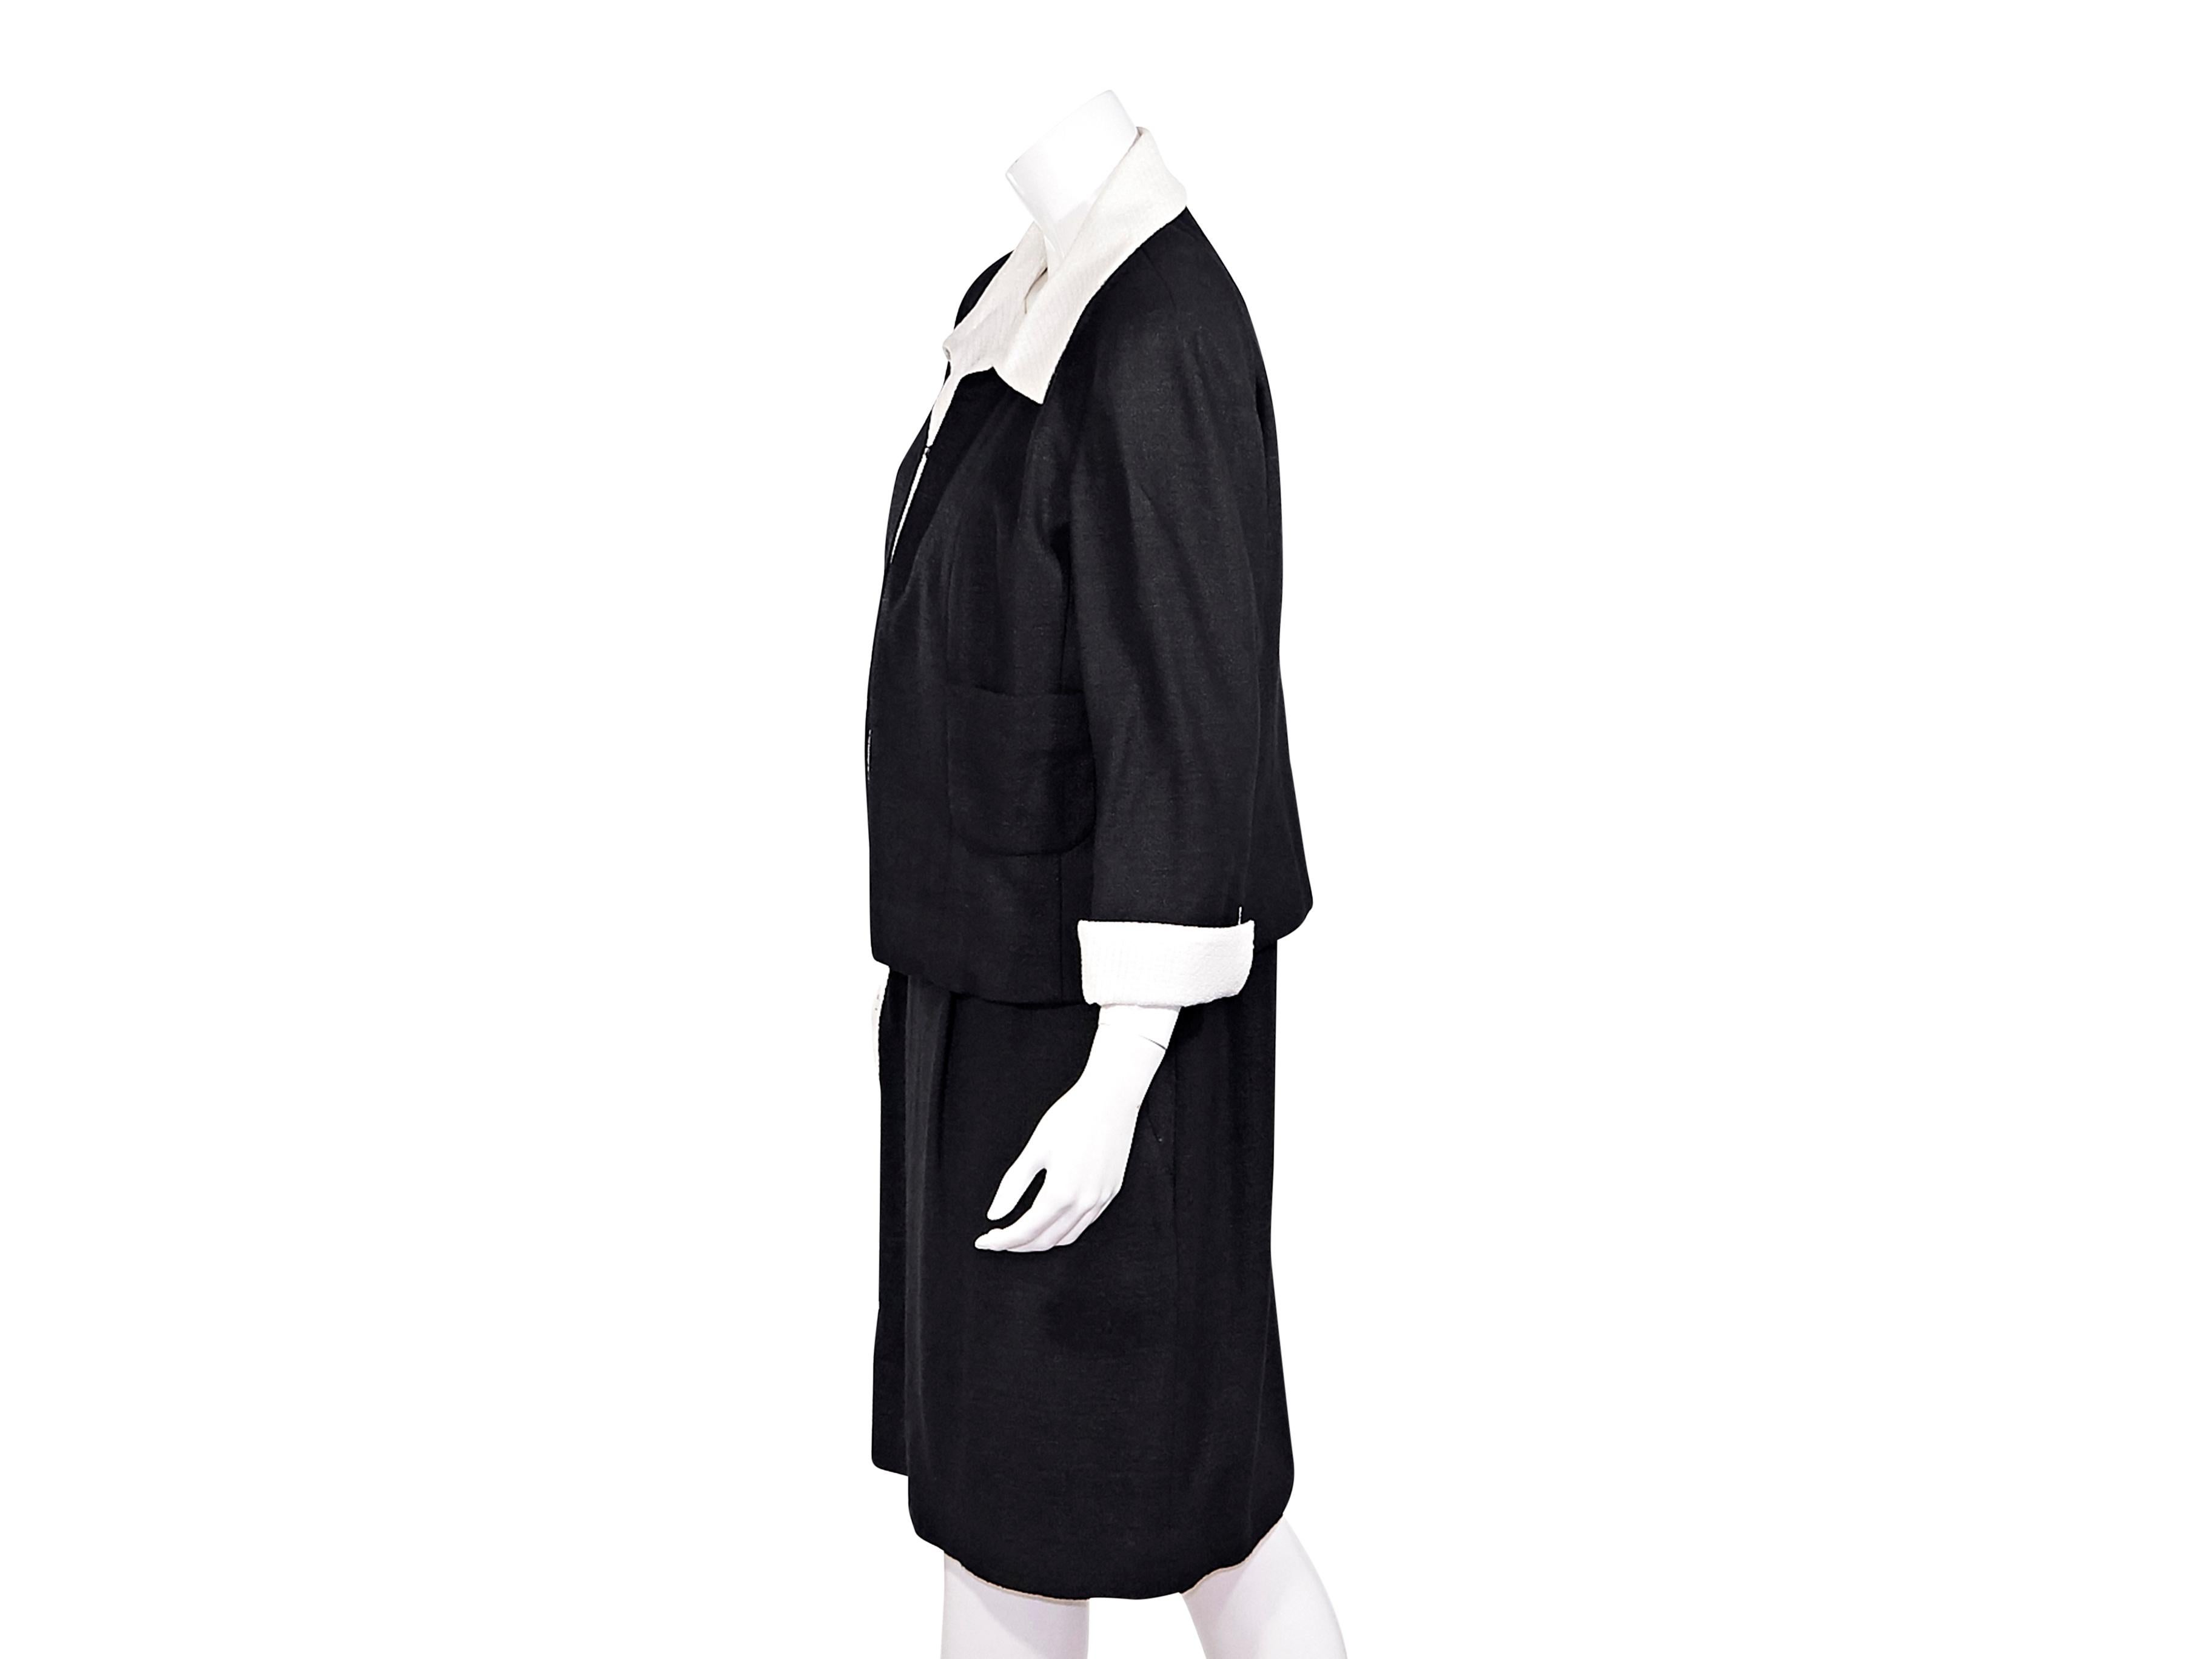 Product details:  Black and white textured jacket and dress set by Chanel.  From the Spring/Summer 2009 collection.  Spread collar.  Concealed hook-front closure.  Waist patch pockets.  Matching shift dress.  Accented with a bow.  Scooopneck. 